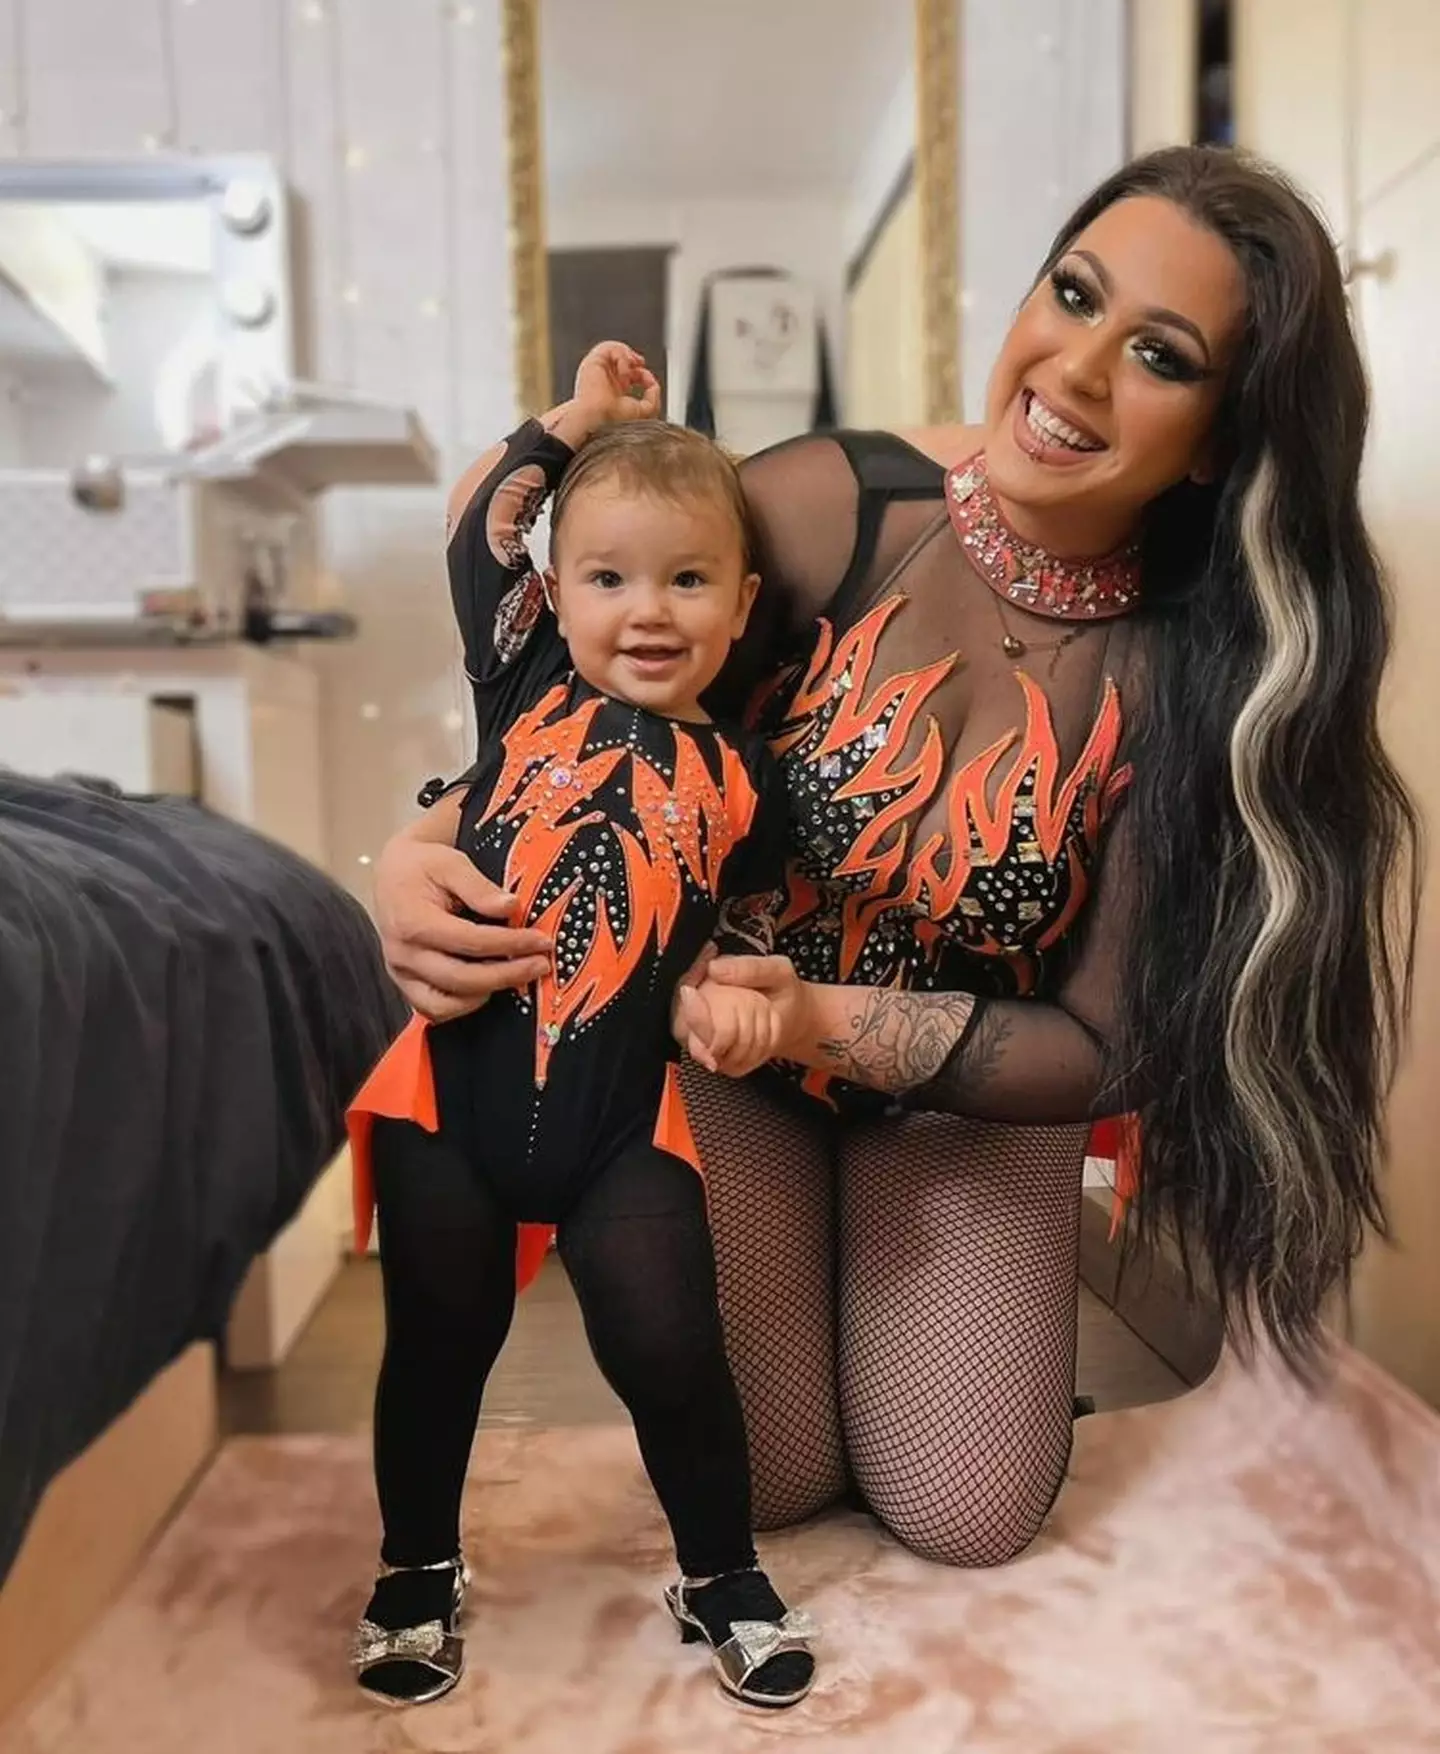 Keyla Remache, 29, from Devon, has been taking her little girl Arwen Millichap along with her to work, which means moving to a new town every week, as part of her tour of the UK.